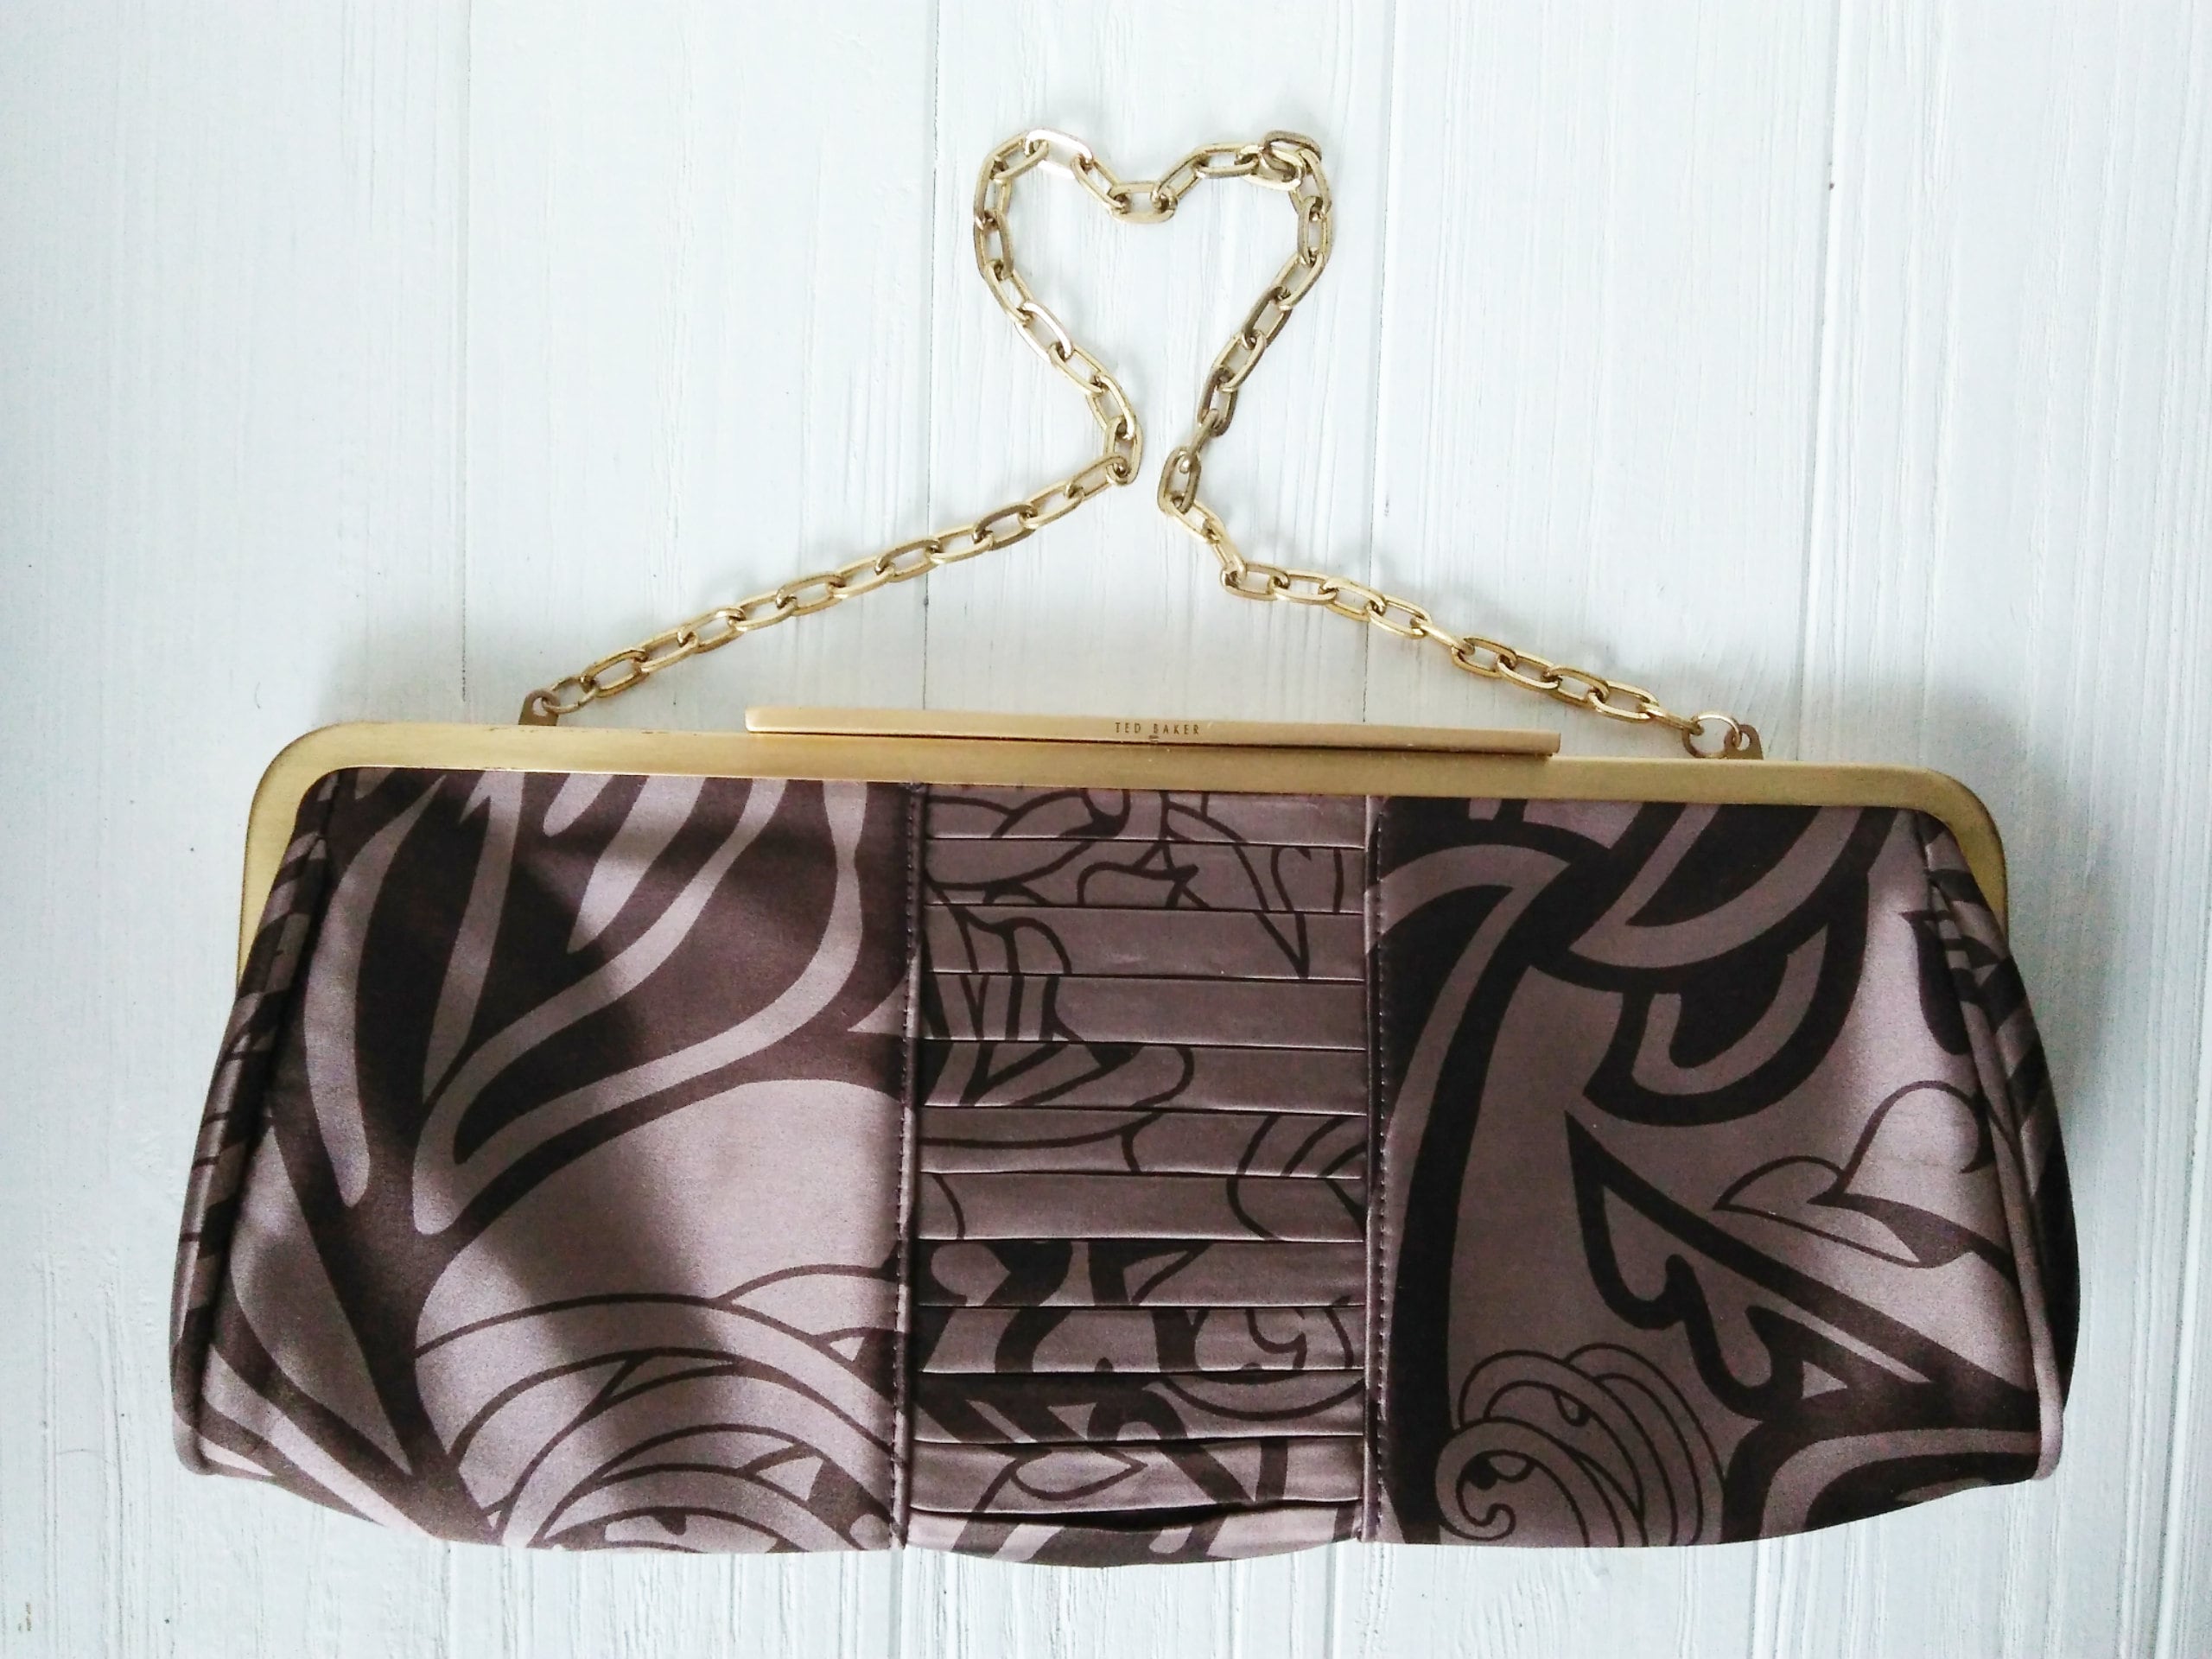 Ted Baker Authenticated Clutch Bag